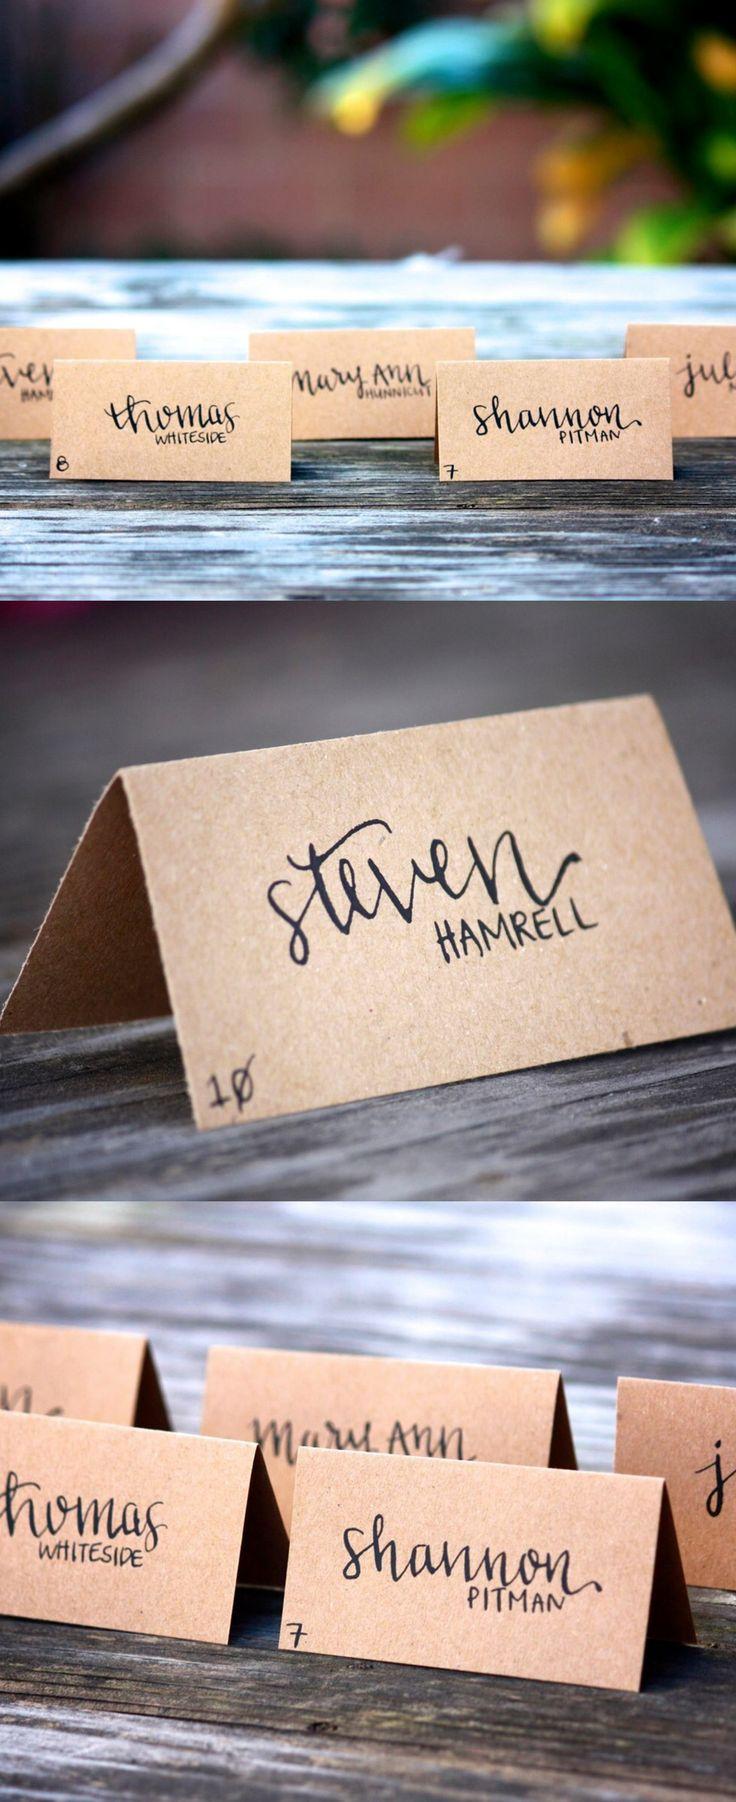 Свадьба - Wedding Place Cards - Tent Fold - Escort Card - Black Calligraphy With Kraft Paper - Dinner Party - Name Tag